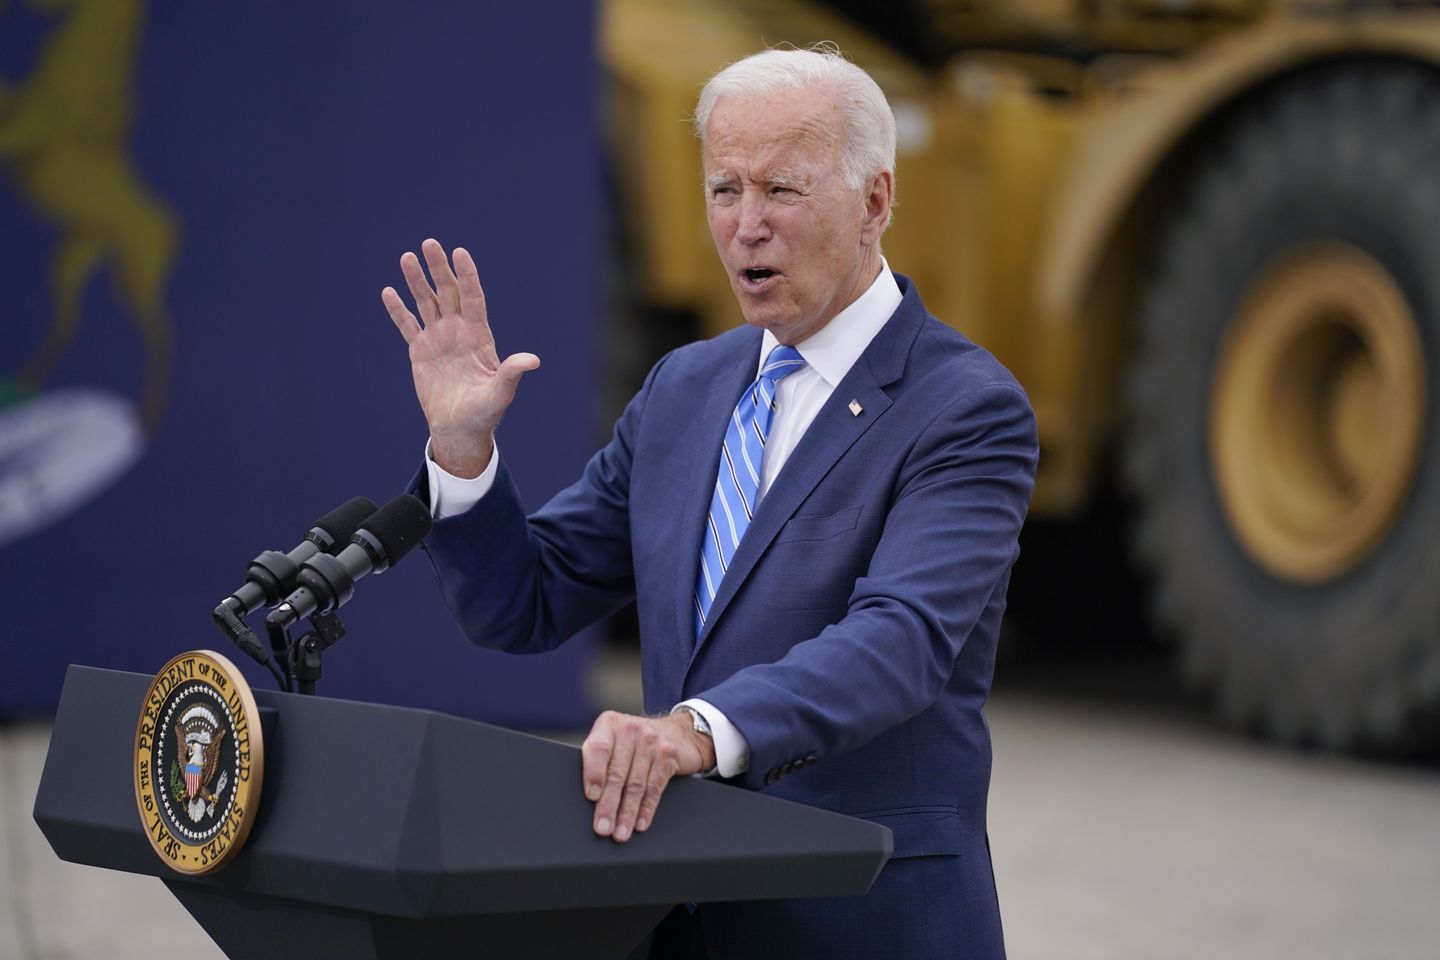 Biden says spending plan is necessary to compete with China